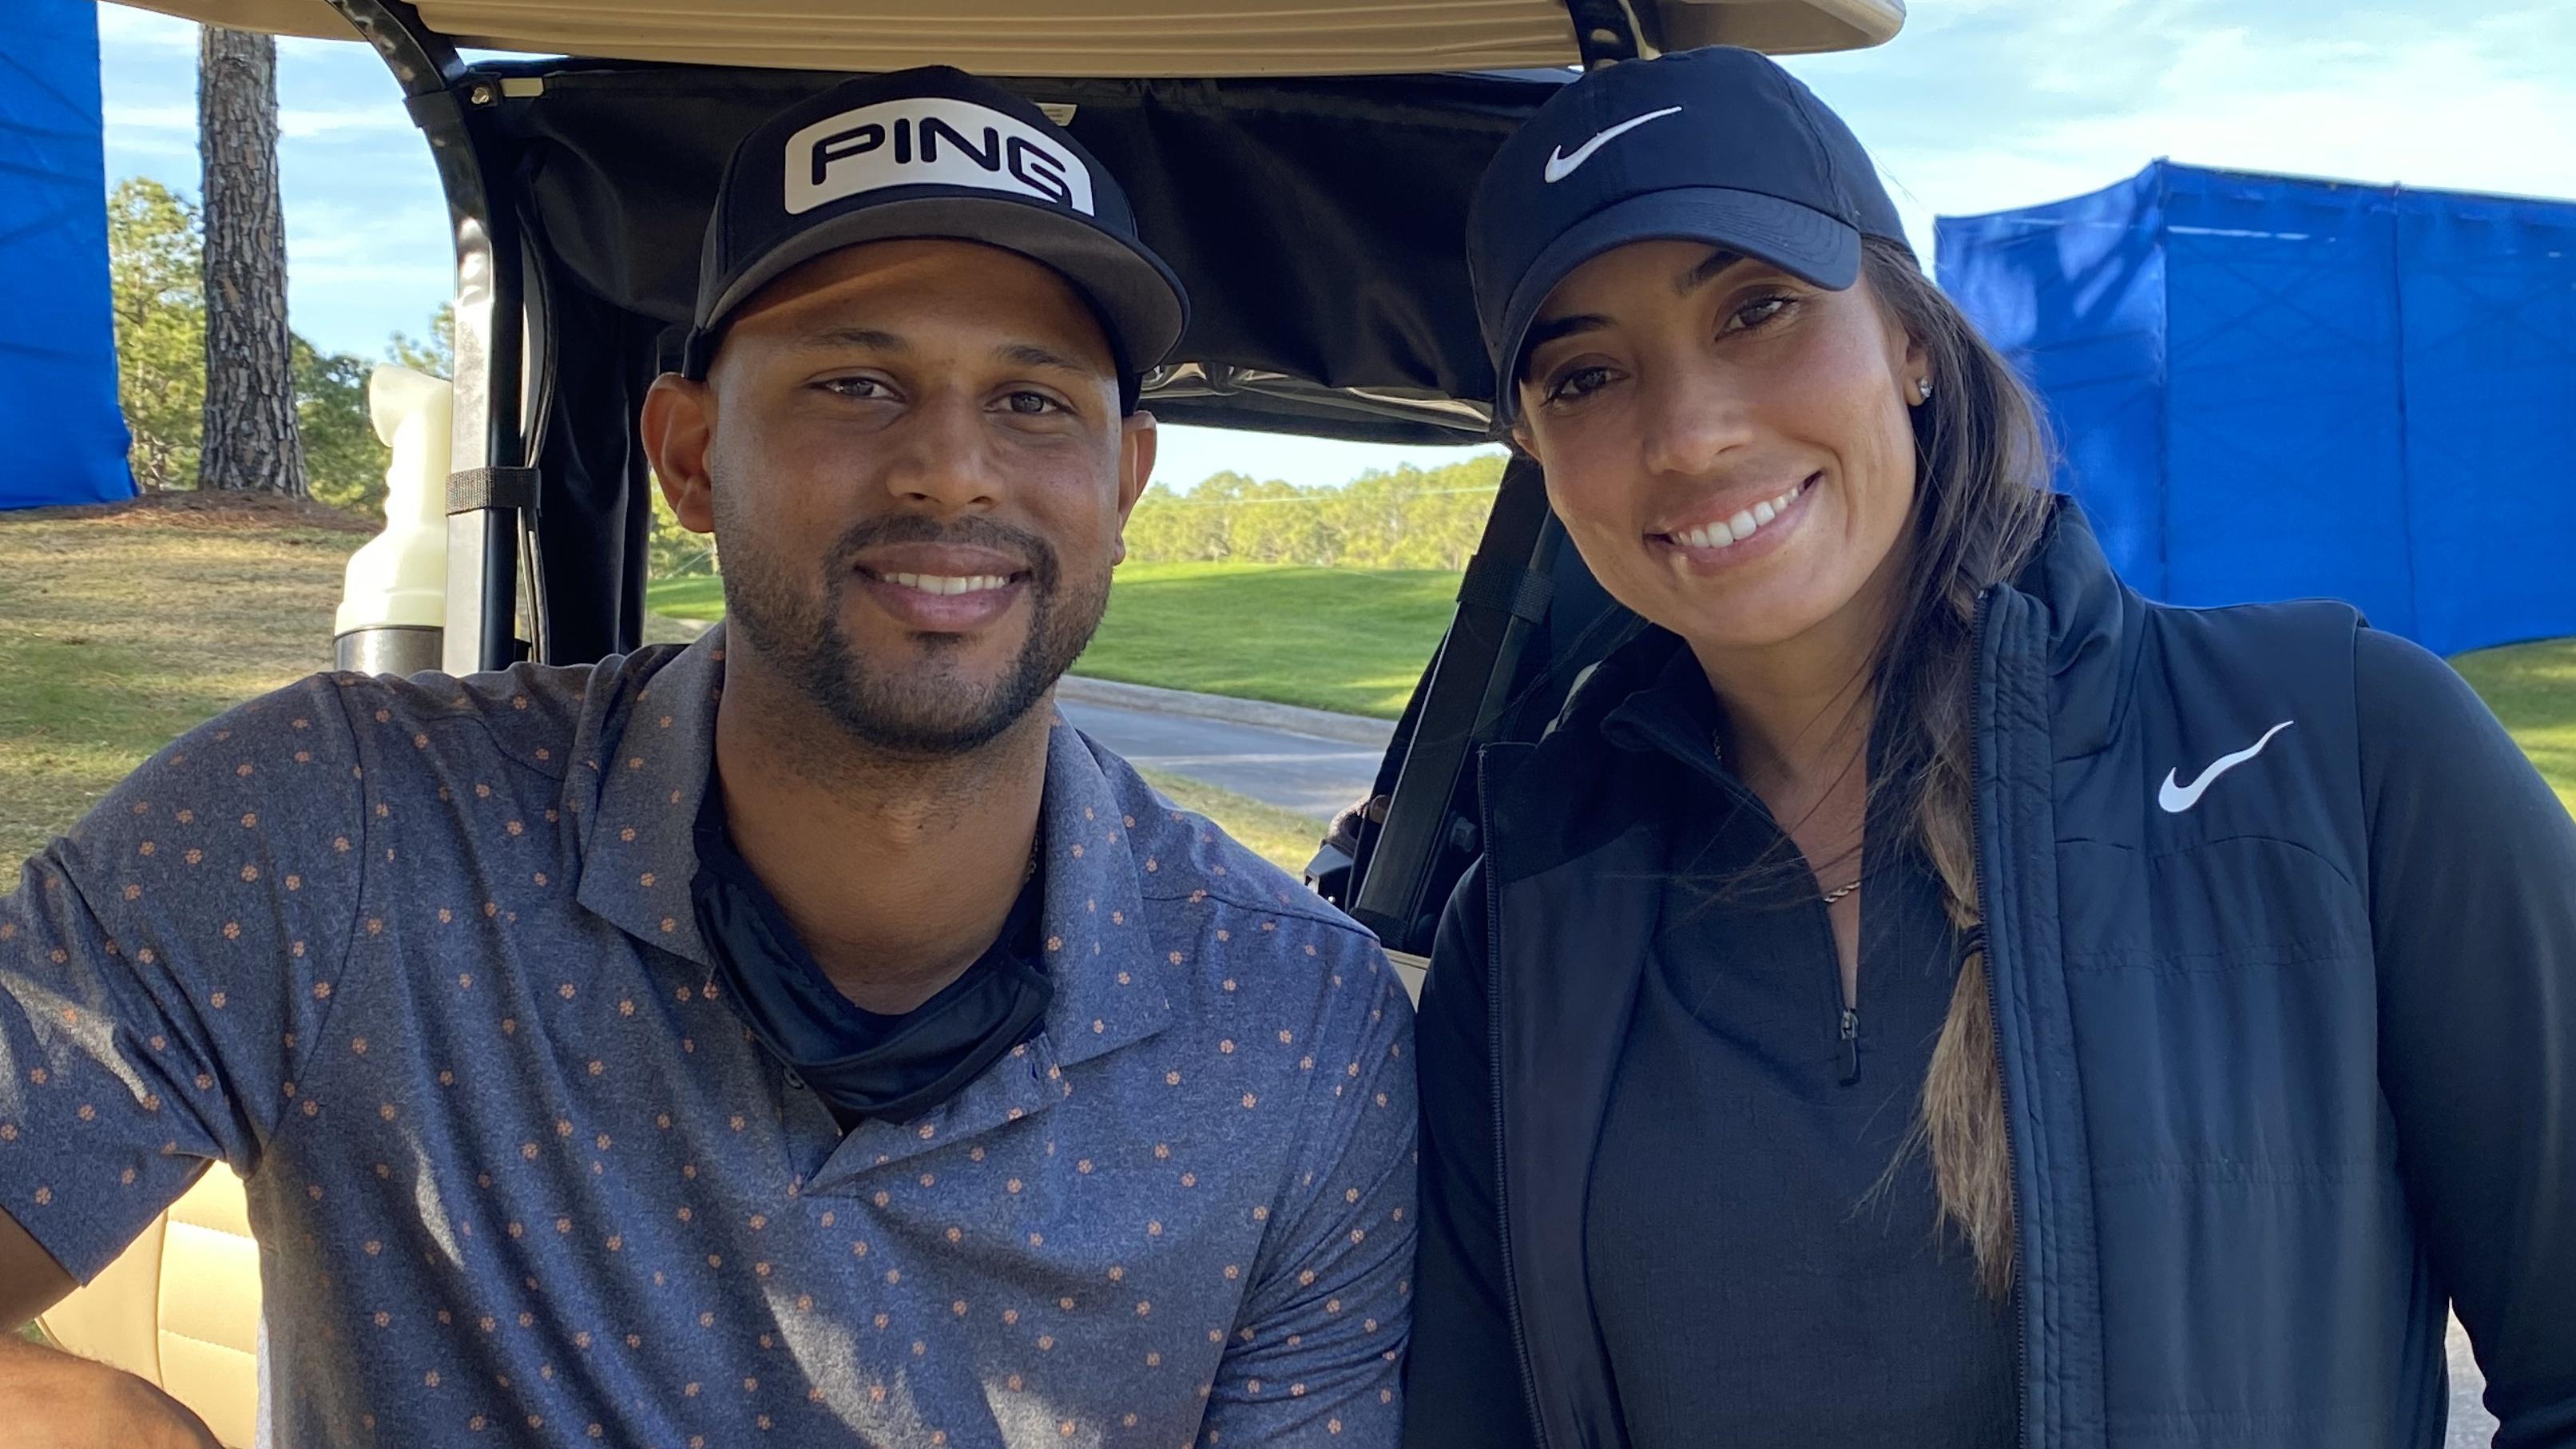 Jan 19, 2021; LAKE BUENA VISTA, FL, USA; Fresh off a win, Cheyenne Woods is on the bag for her boyfriend, Yankees outfielder Aaron Hicks, at Diamond Resorts TOC. / © Golfweek-USA TODAY NETWORK